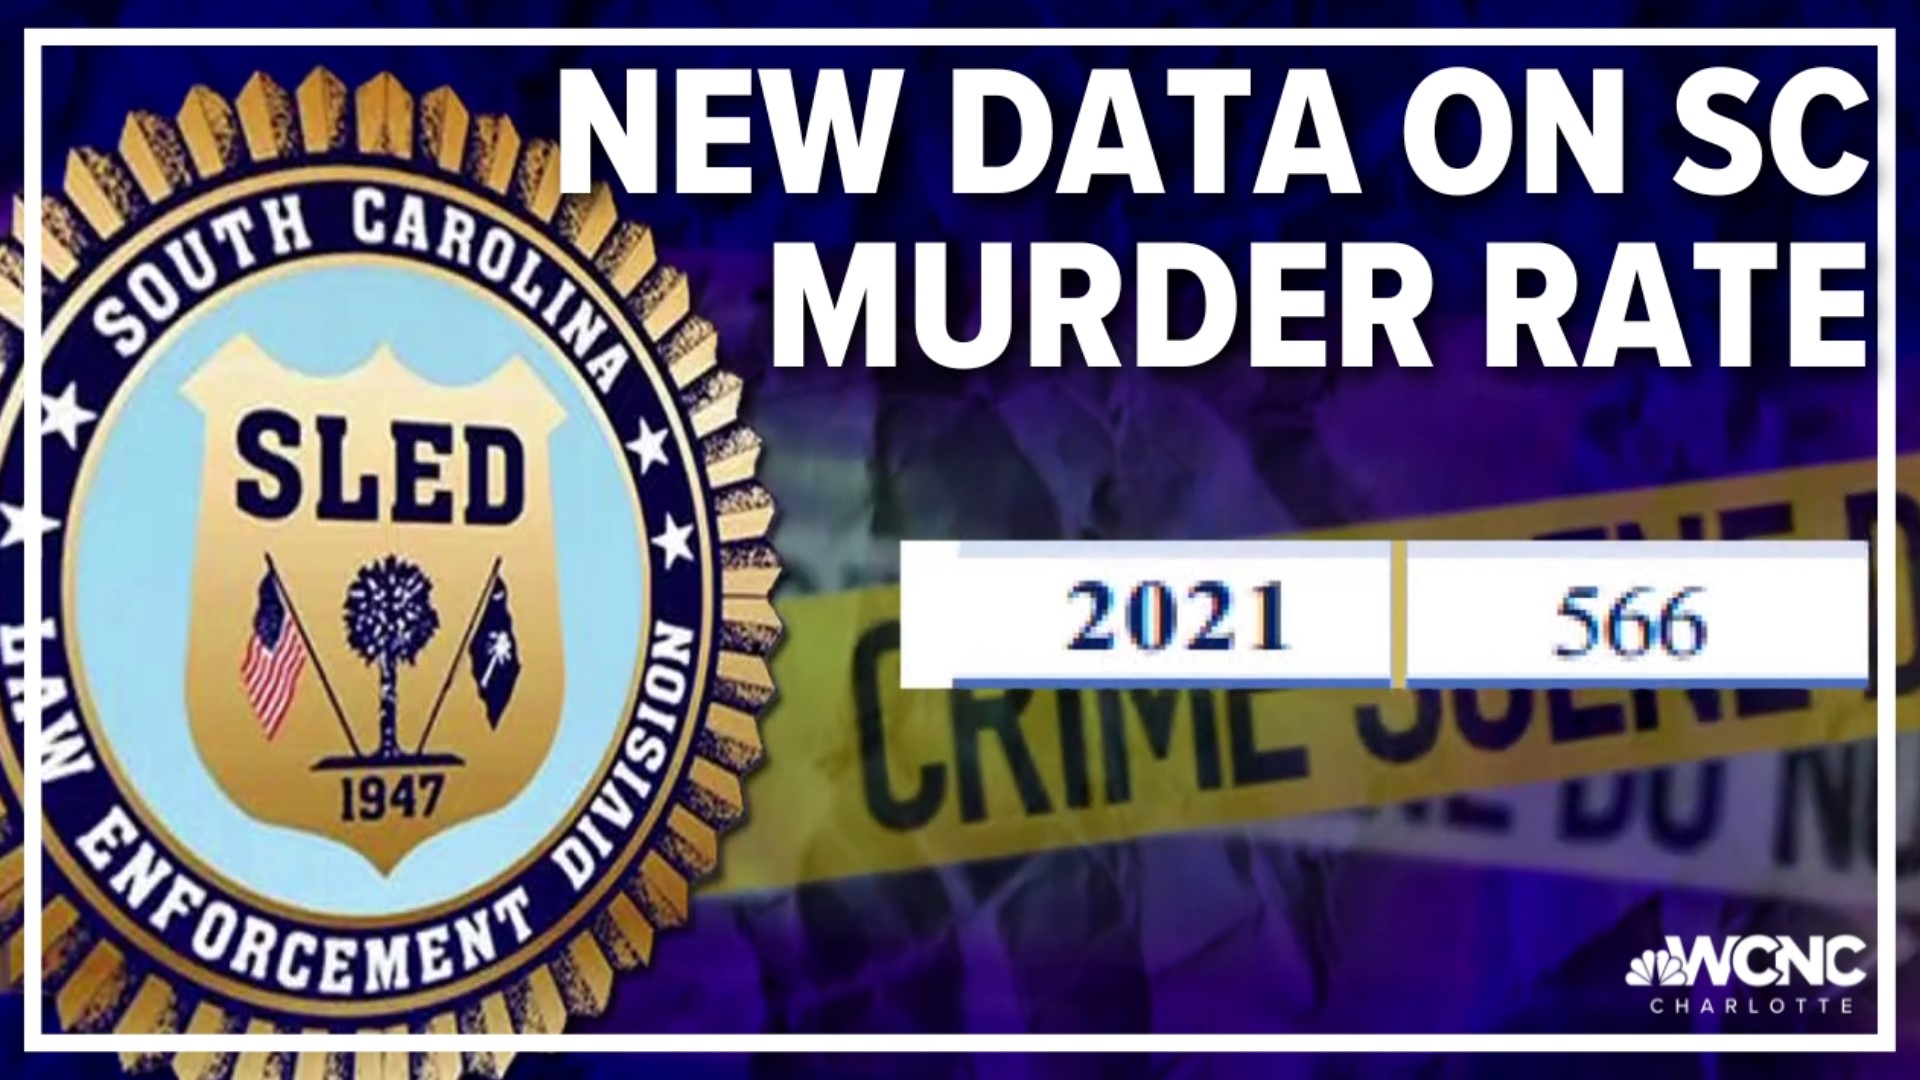 The alarming data shows the rate of murder is at its highest since 1991.